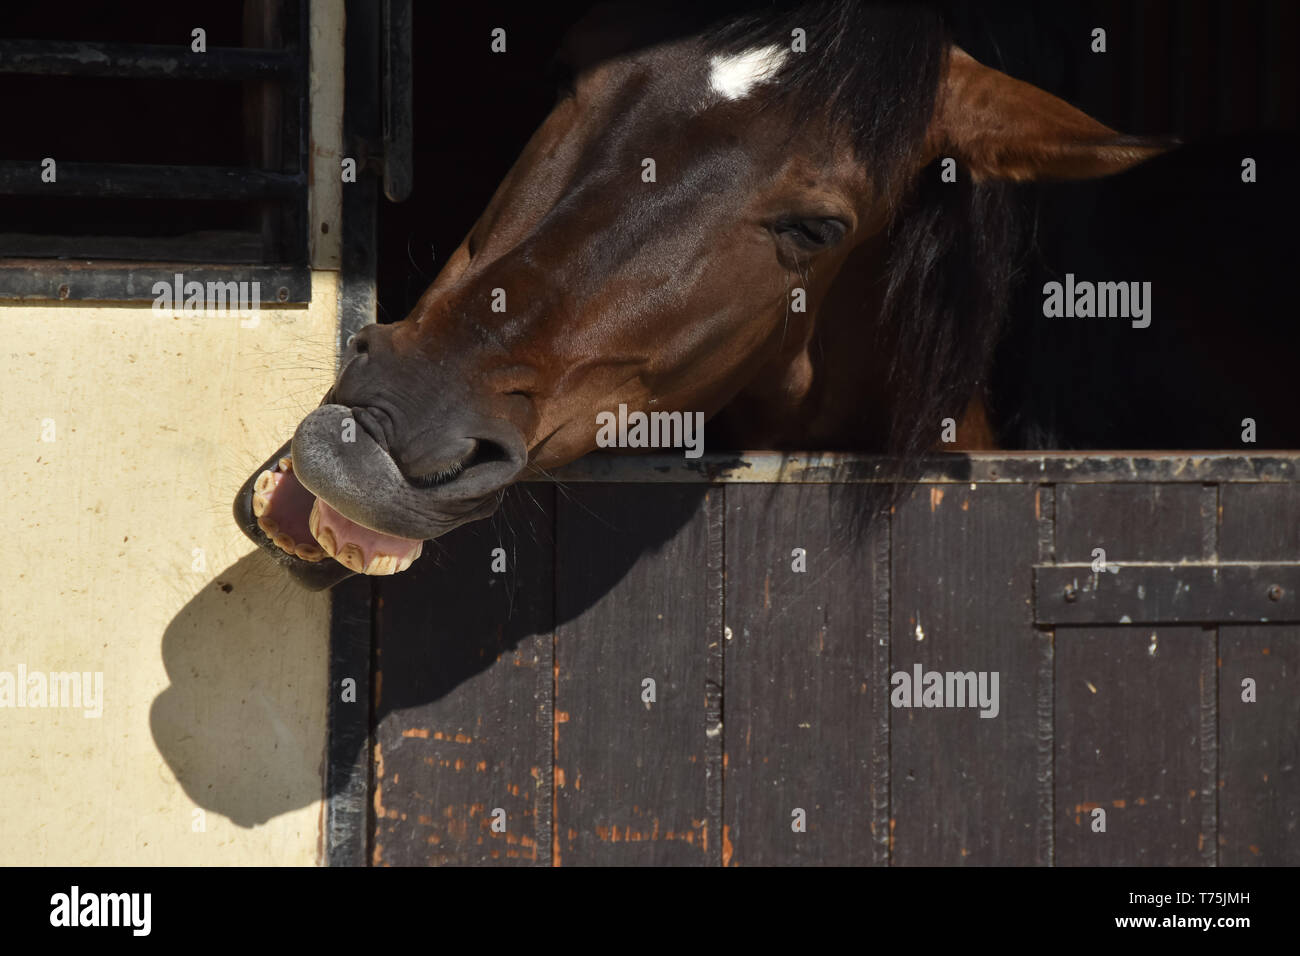 The funny brown horse laughs, head shot. Stock Photo